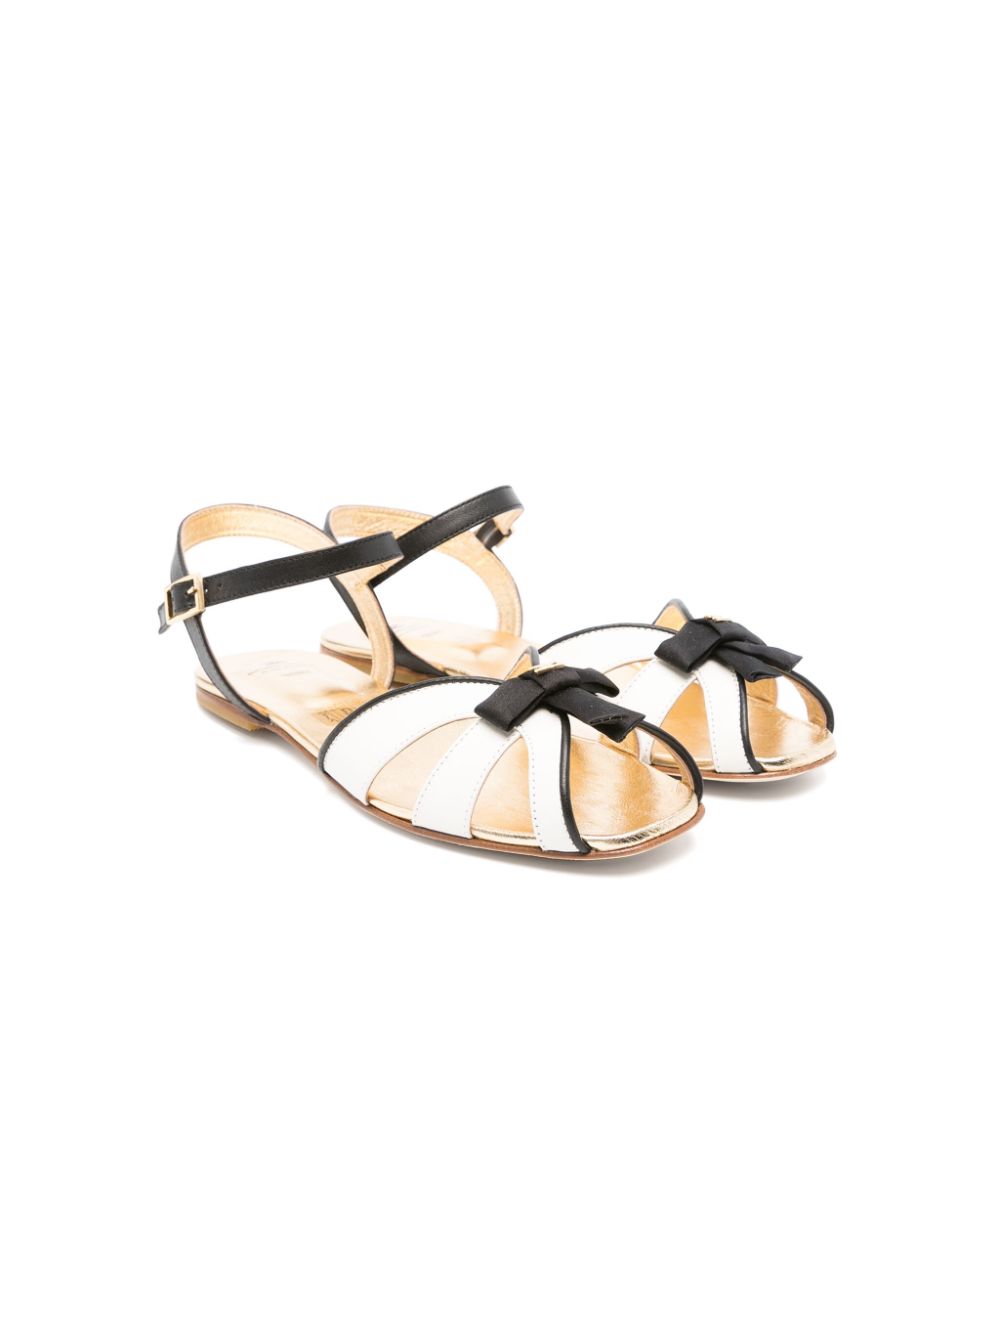 Black and white sandals for girls